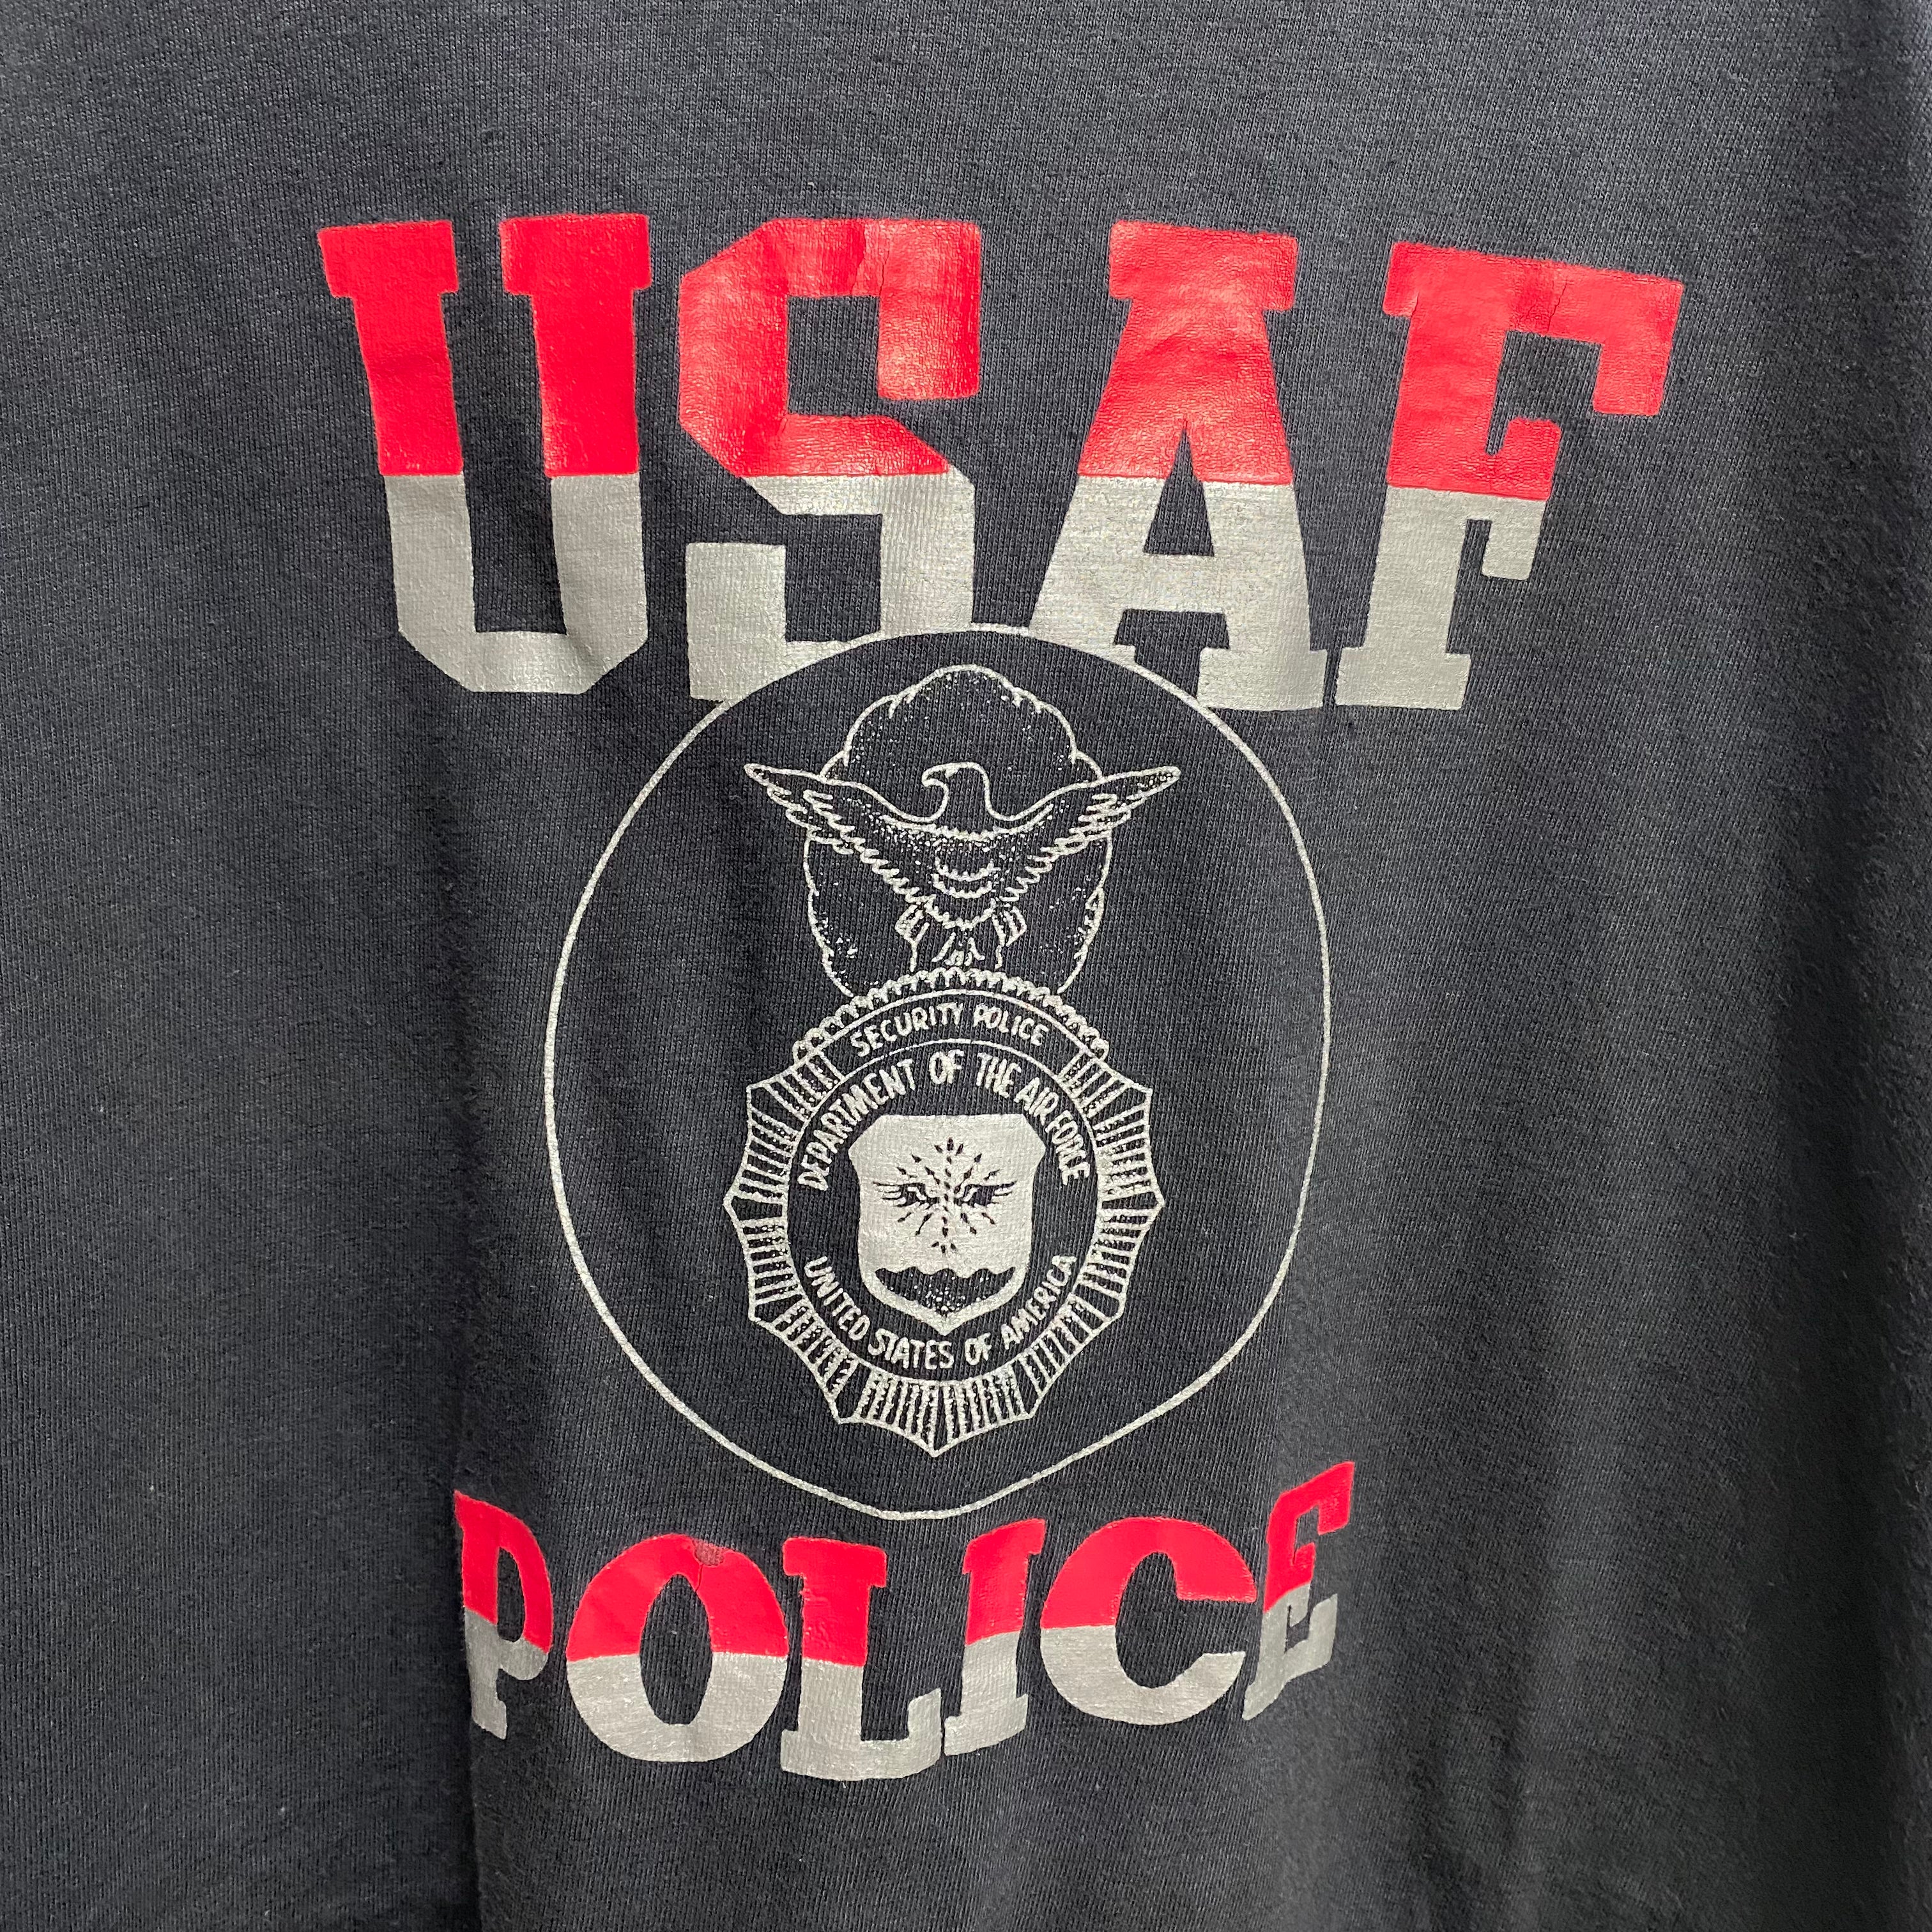 [ ONLY ONE ! ] U.S.A.F. ' POLICE ' SHORT SLEEVE T-SHIRT / Mr.Clean Select